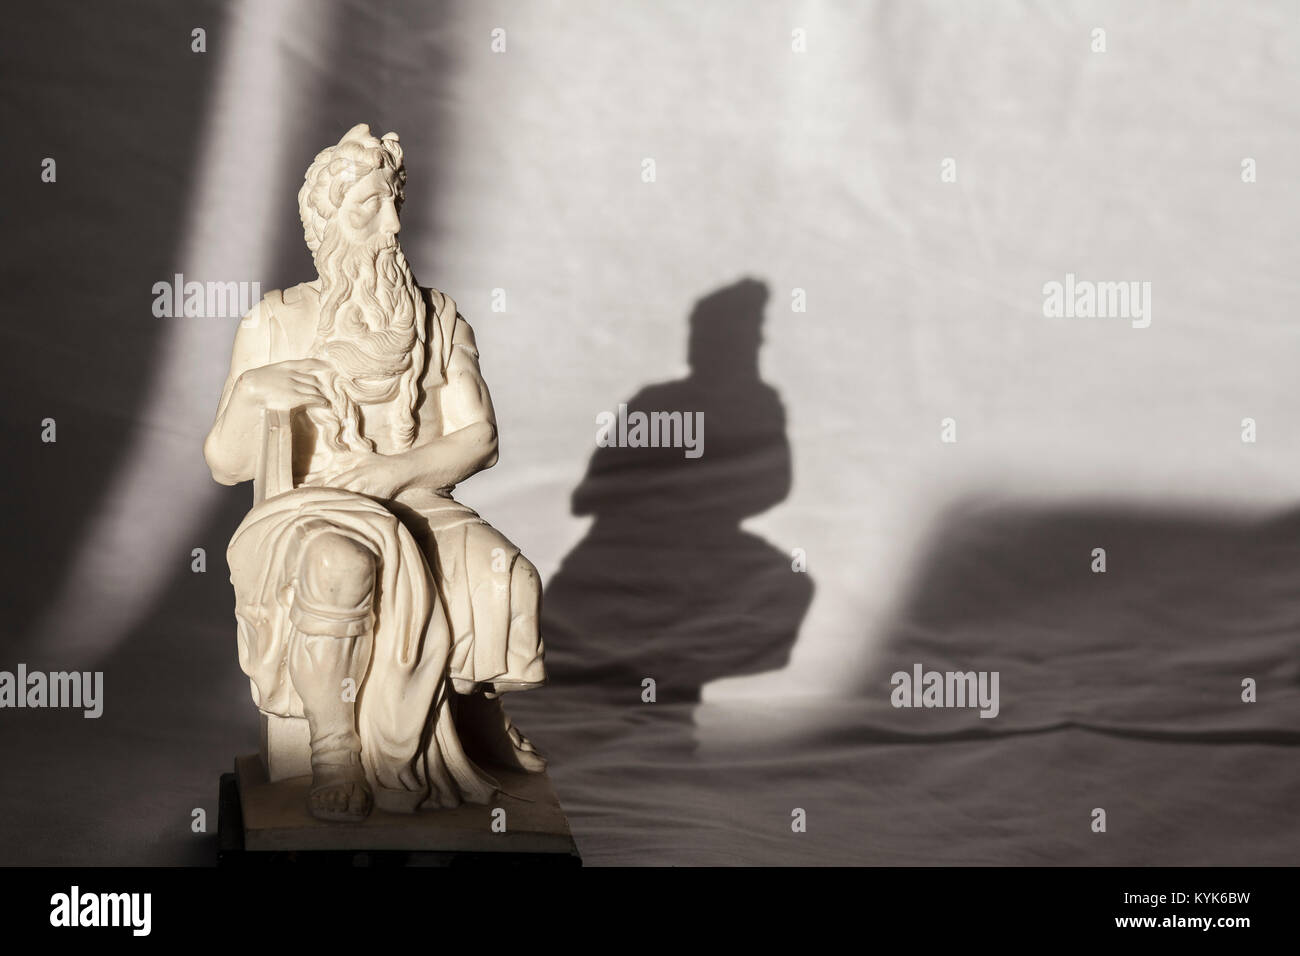 Replica of Michelangelo Moses sculpture, very popular as Rome souvenir. Studio take over wrinkled white fabric Stock Photo